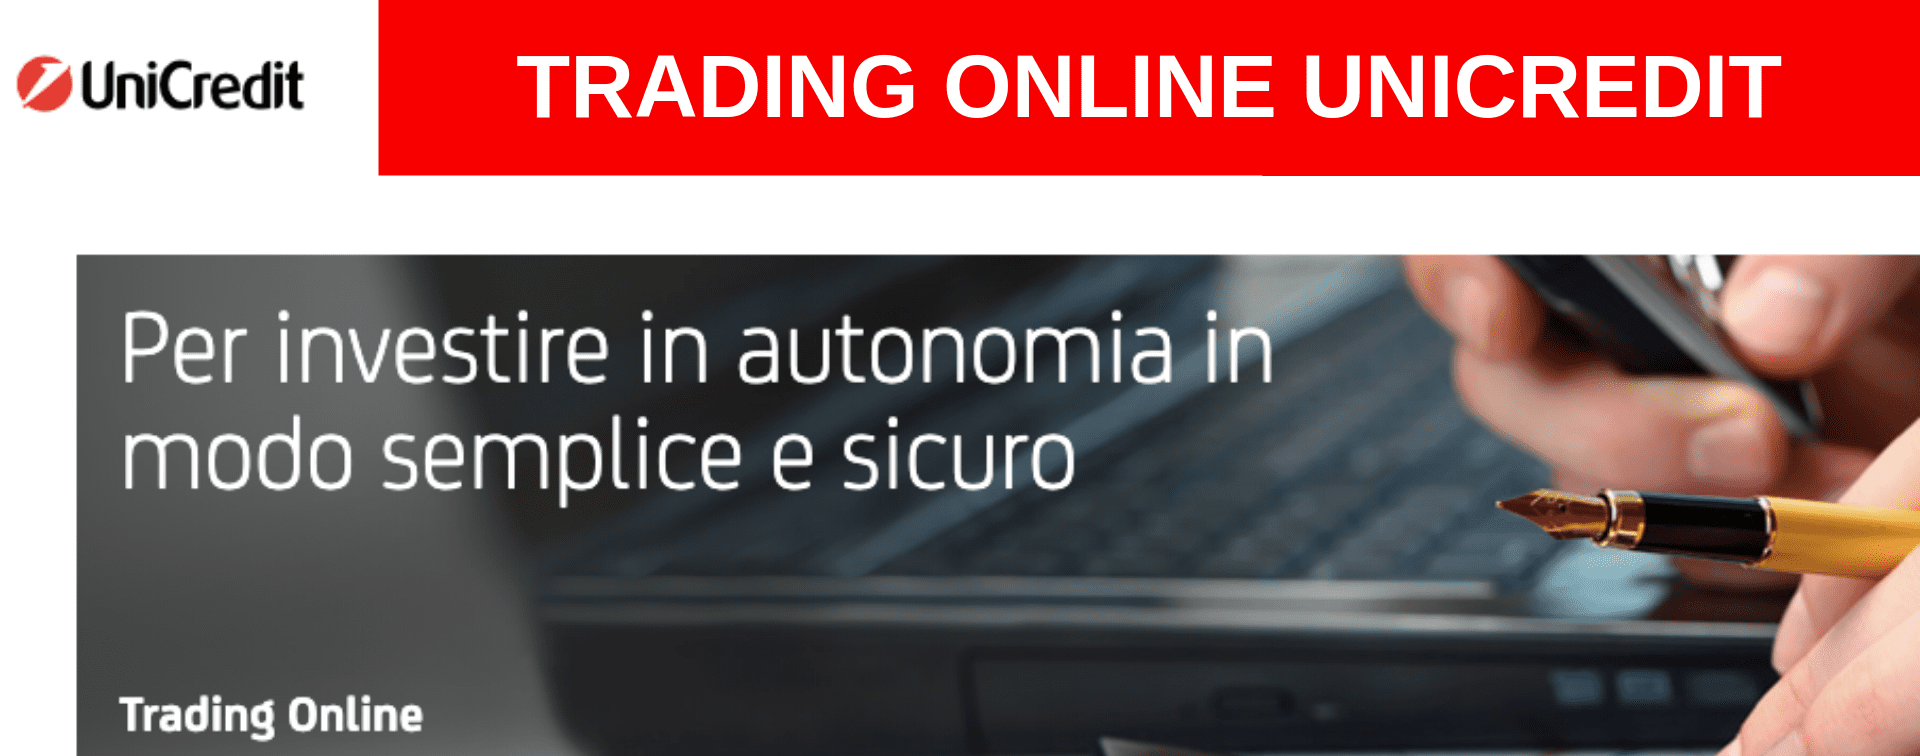 unicredit trading online